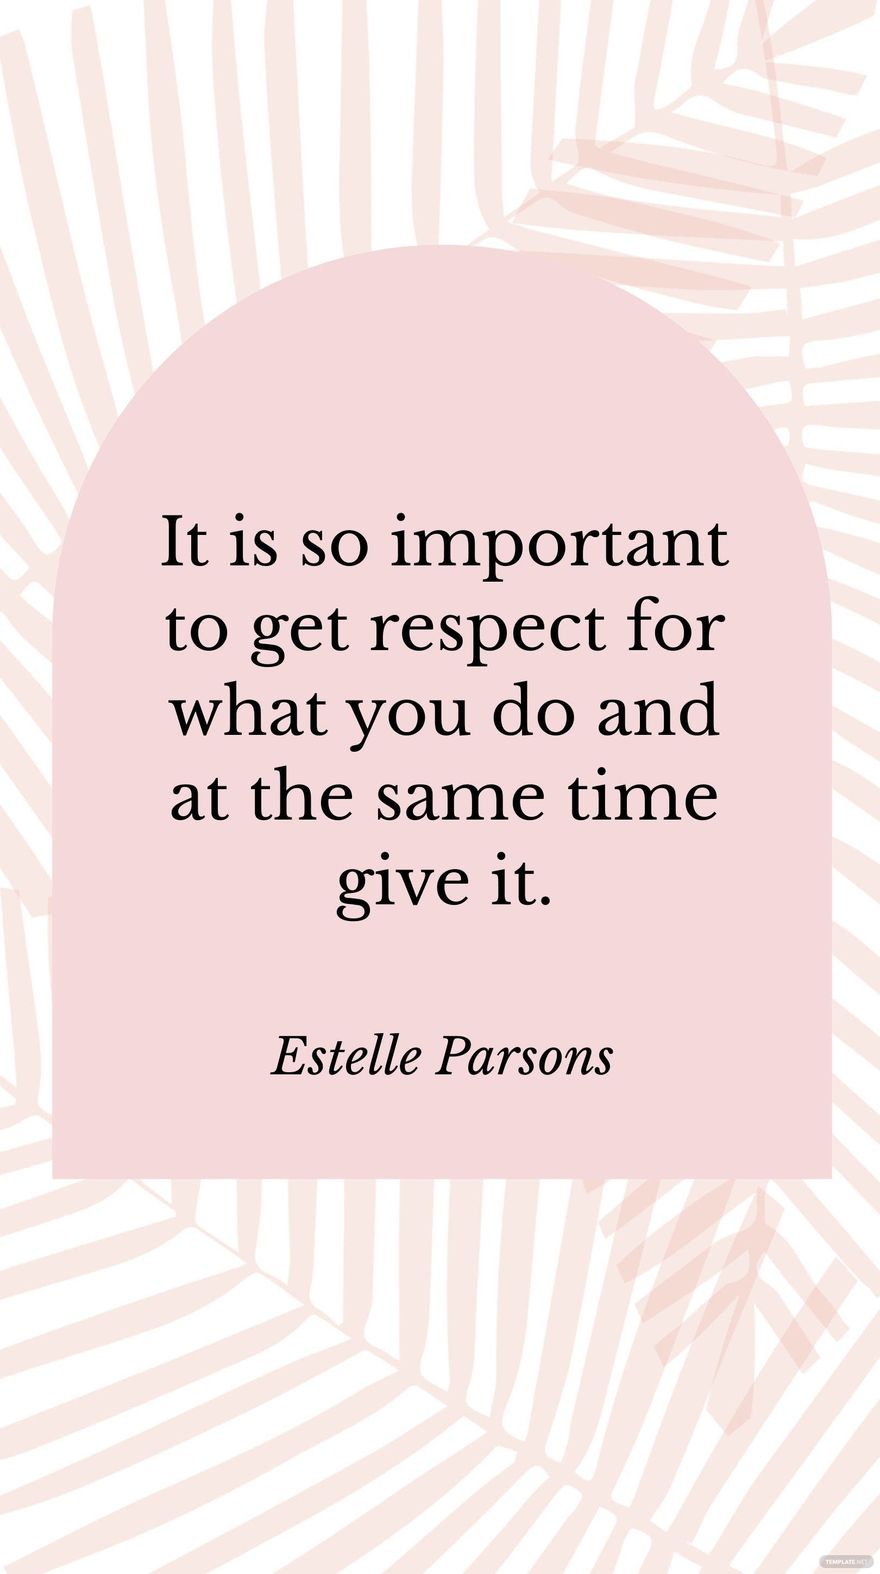 Estelle Parsons - It is so important to get respect for what you do and at the same time give it. in JPG